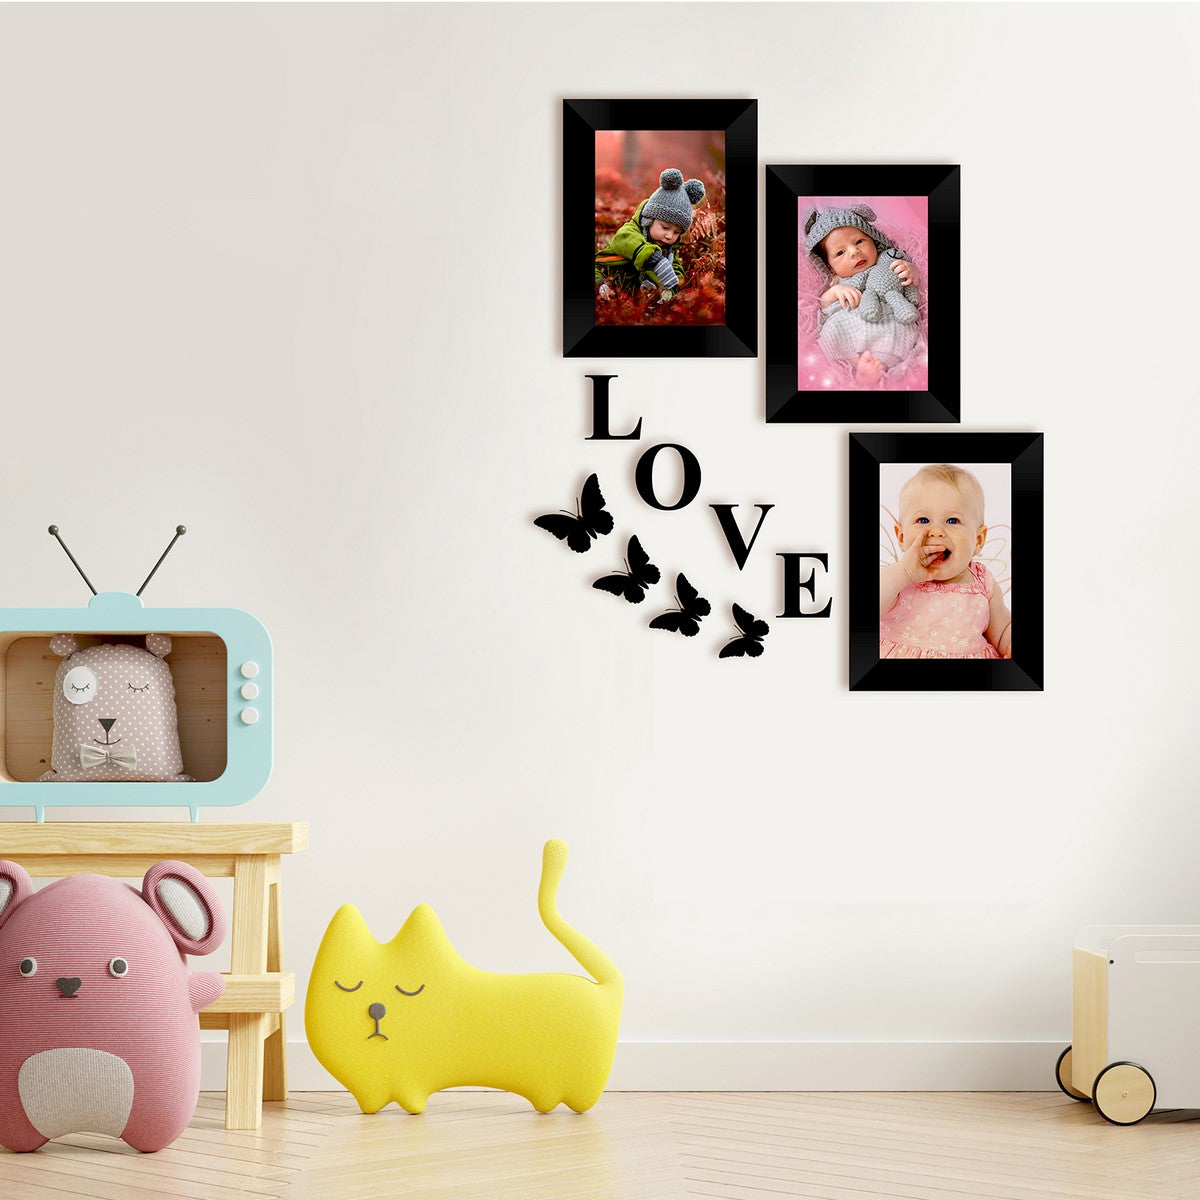 Memory Wall Collage Photo Frame - Set of 3 Photo Frames for 3 Photos of 4"x6", 1 Piece of LOVE, 4 Pieces of BUTTERFLIES 2